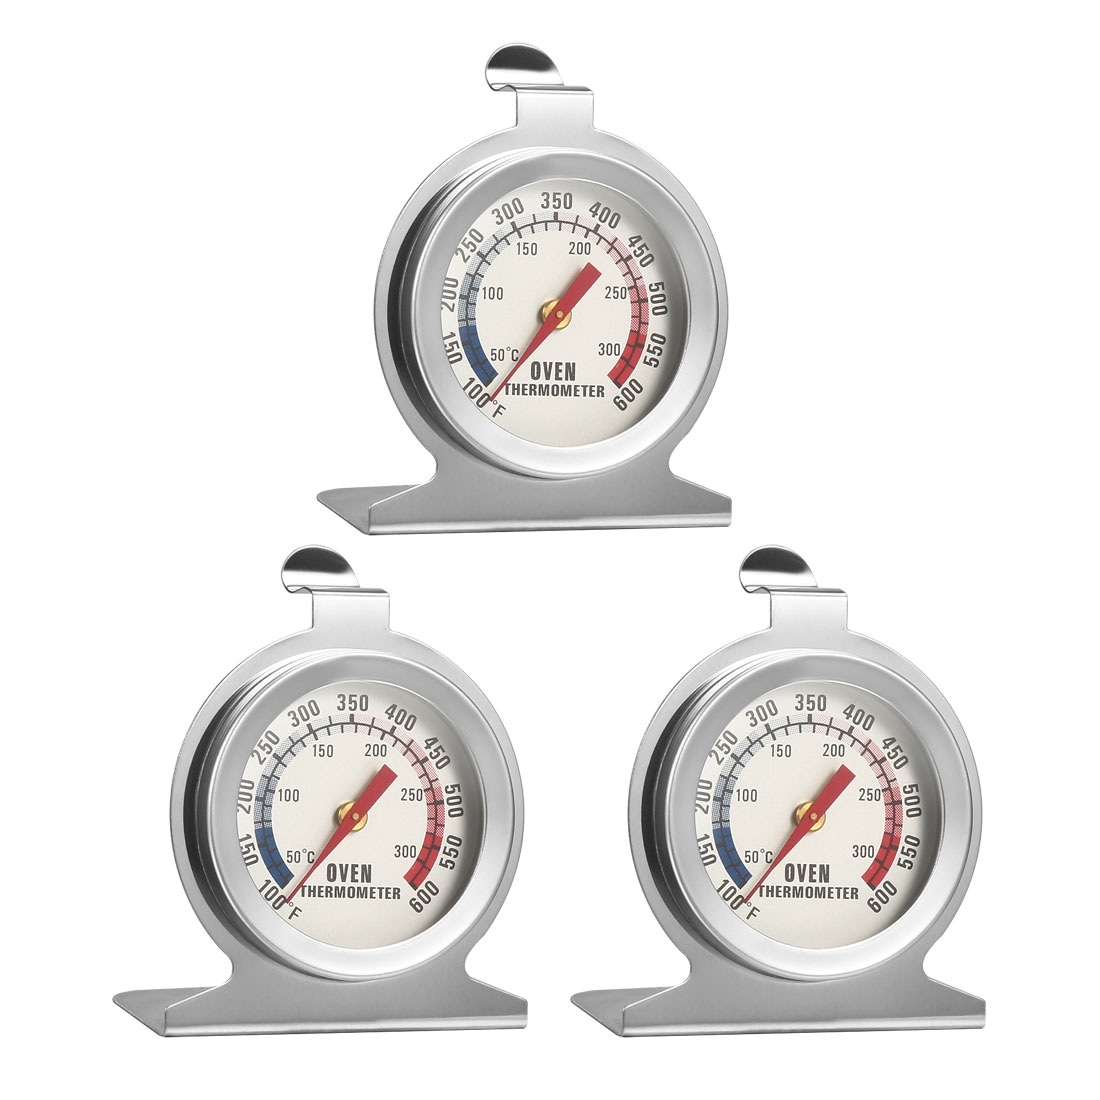 https://ak1.ostkcdn.com/images/products/is/images/direct/c5fd04c419f246a7c3ecdded07ed7b3f16391655/Oven-Thermometer-100-600F-Stainless-Steel-Instant-Read-Temperature-Gauge-3pcs.jpg